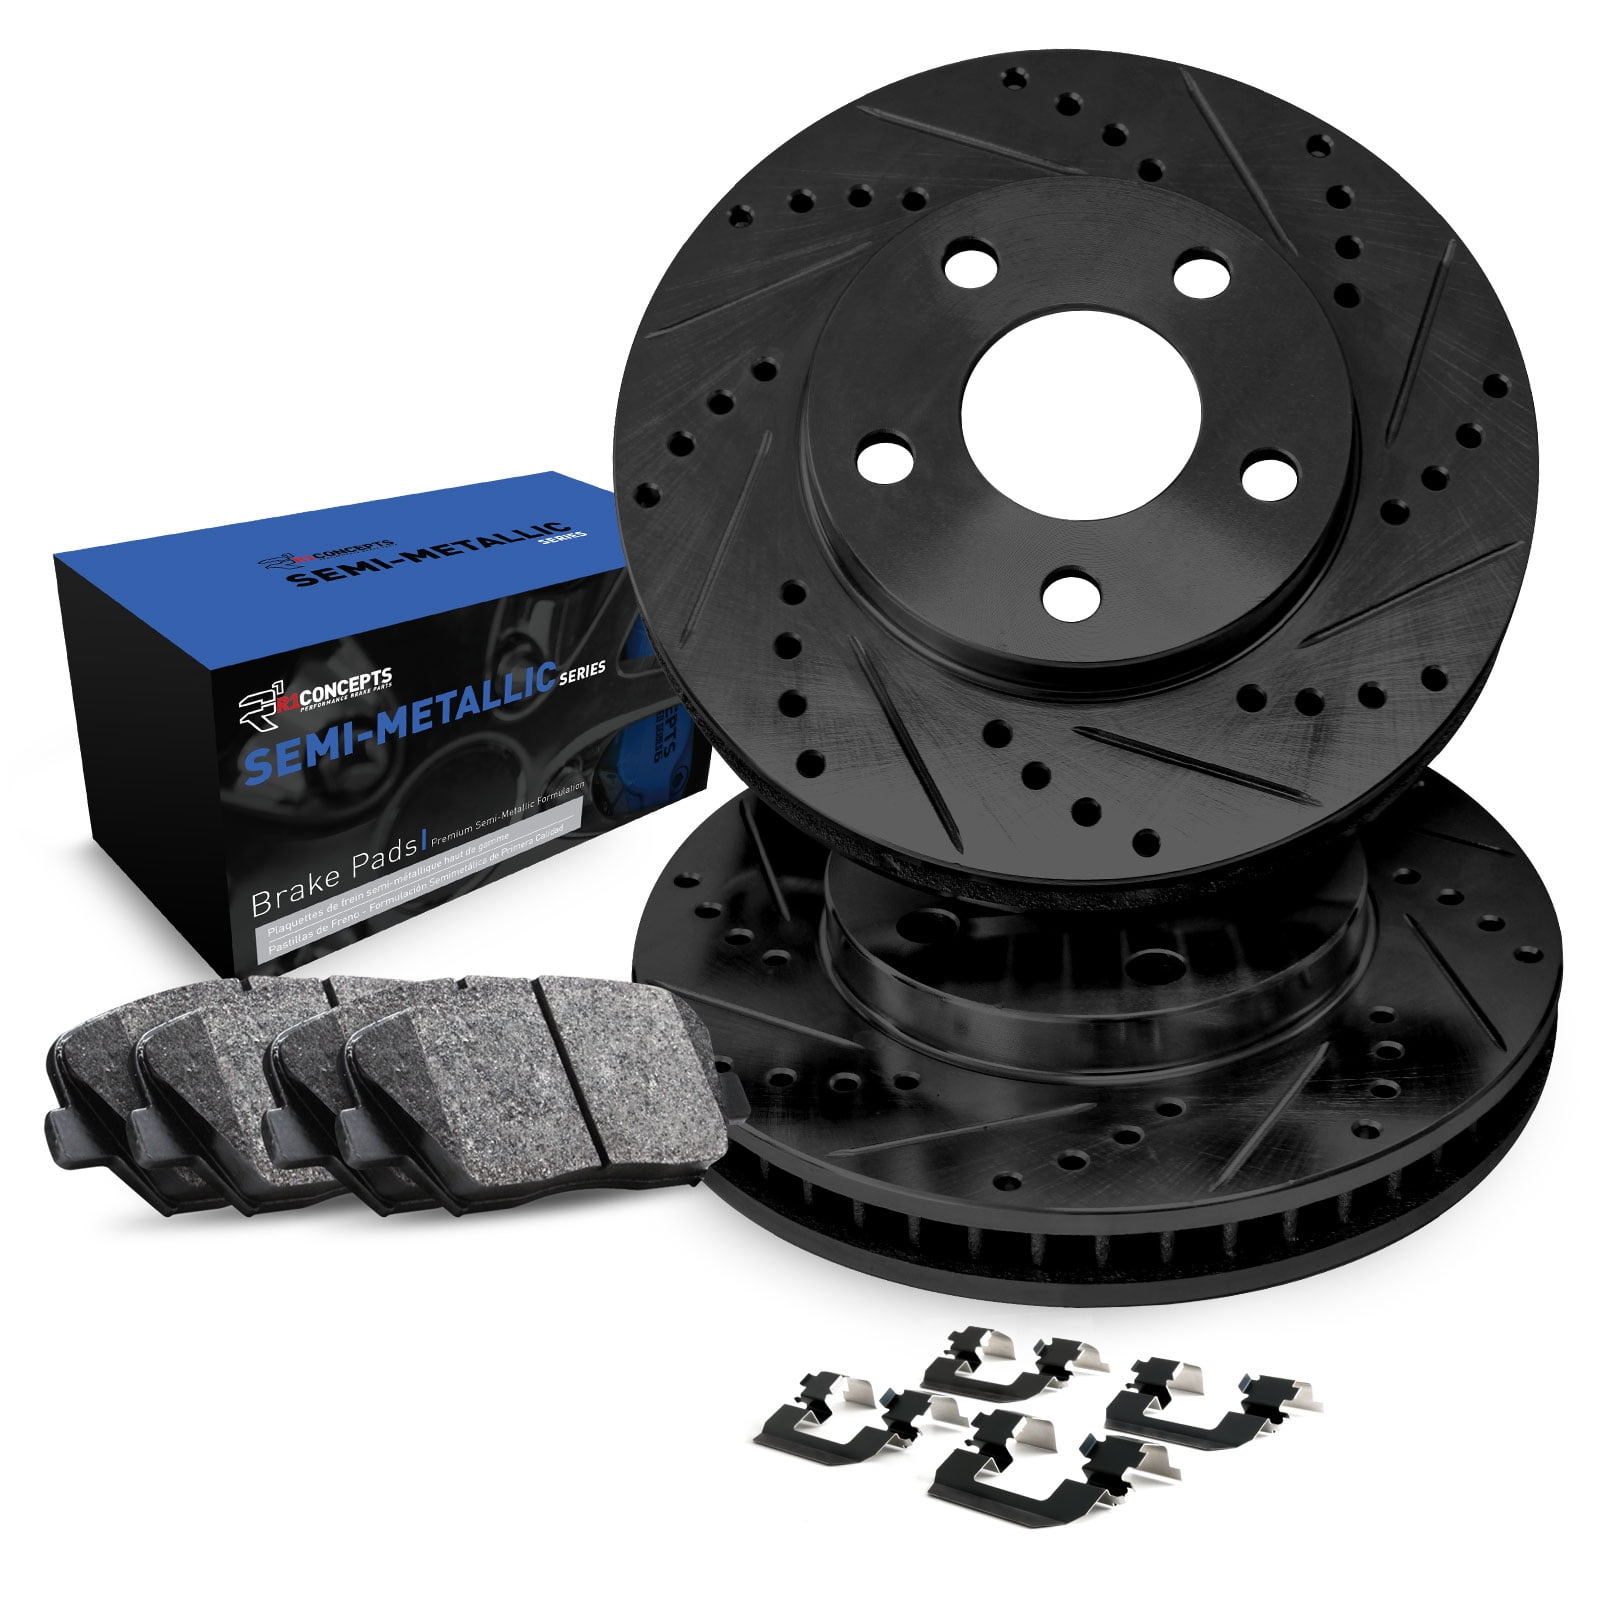 Front+Rear Kit 4 OEM Replacement Disc Brake Rotors High-End 8 Semi-Metallic Pads Fits:- Jeep 5lug